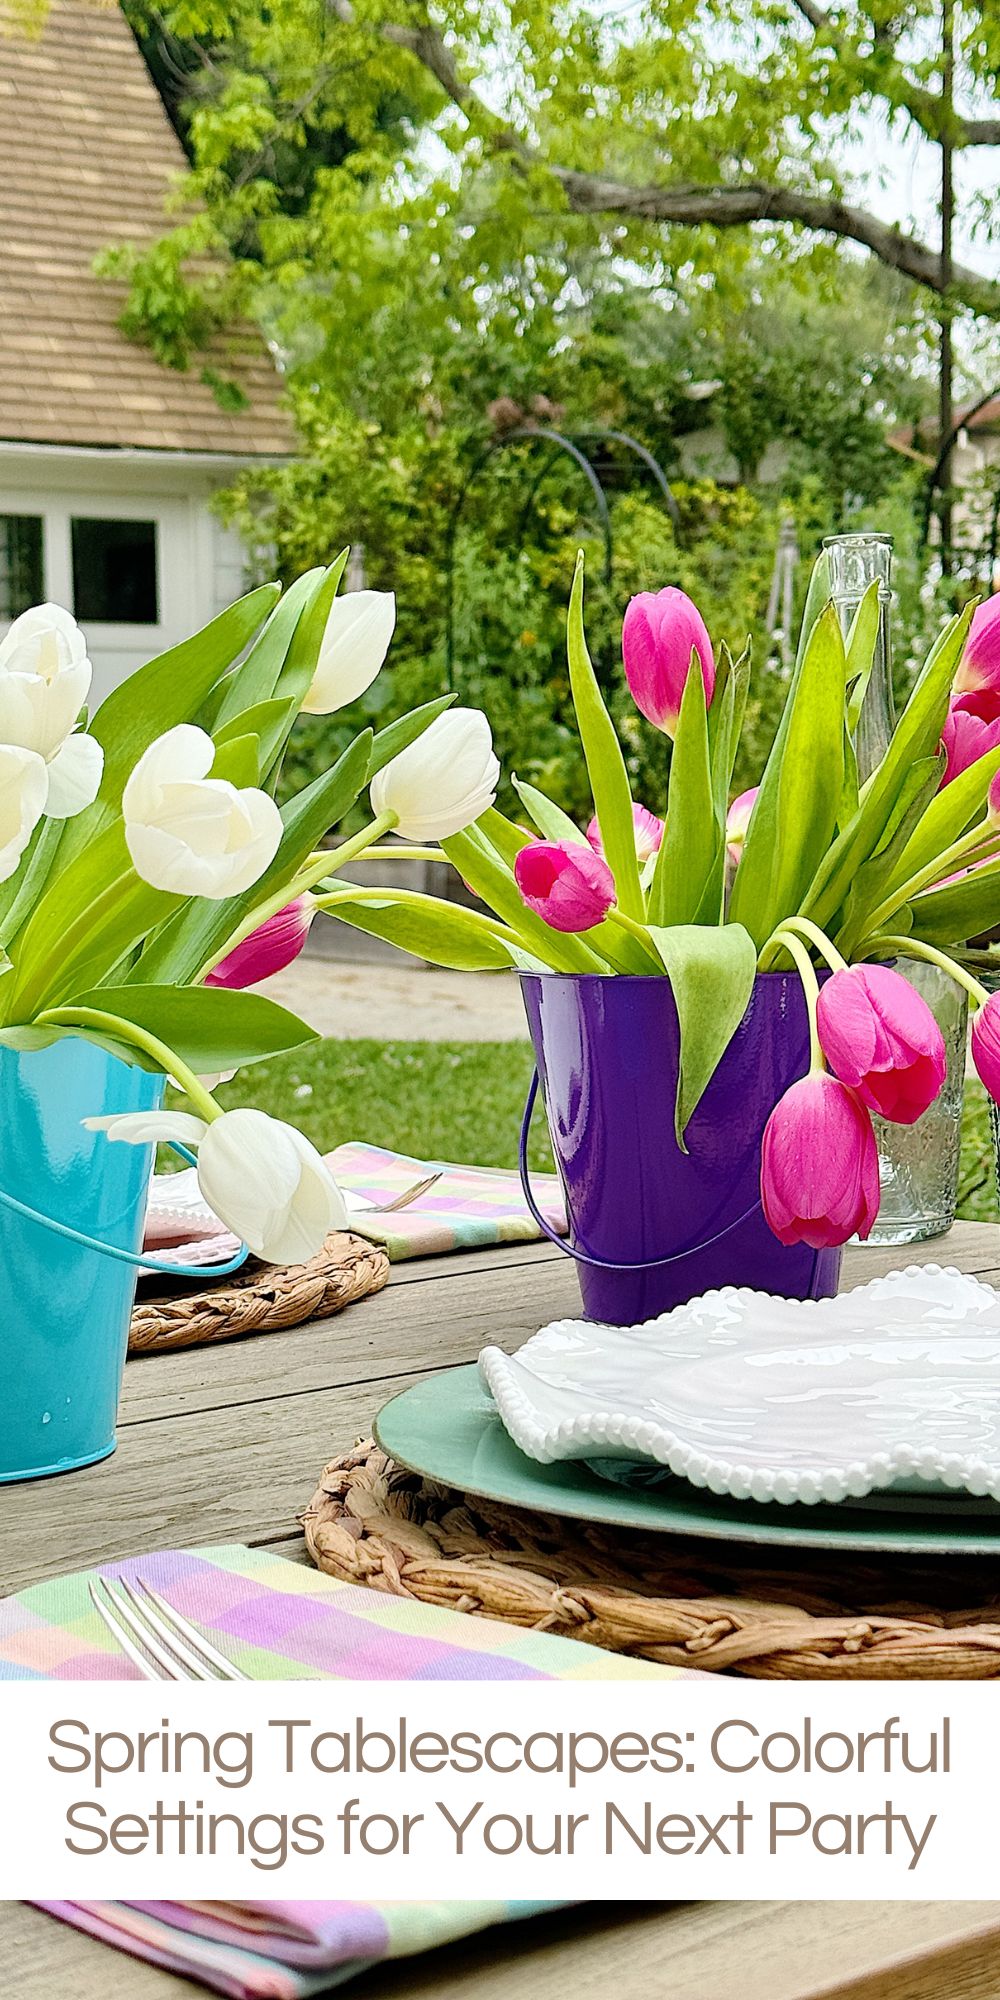 One of the most enchanting ways to celebrate the season is creating colorful spring tablescapes that capture the essence of springtime bliss.